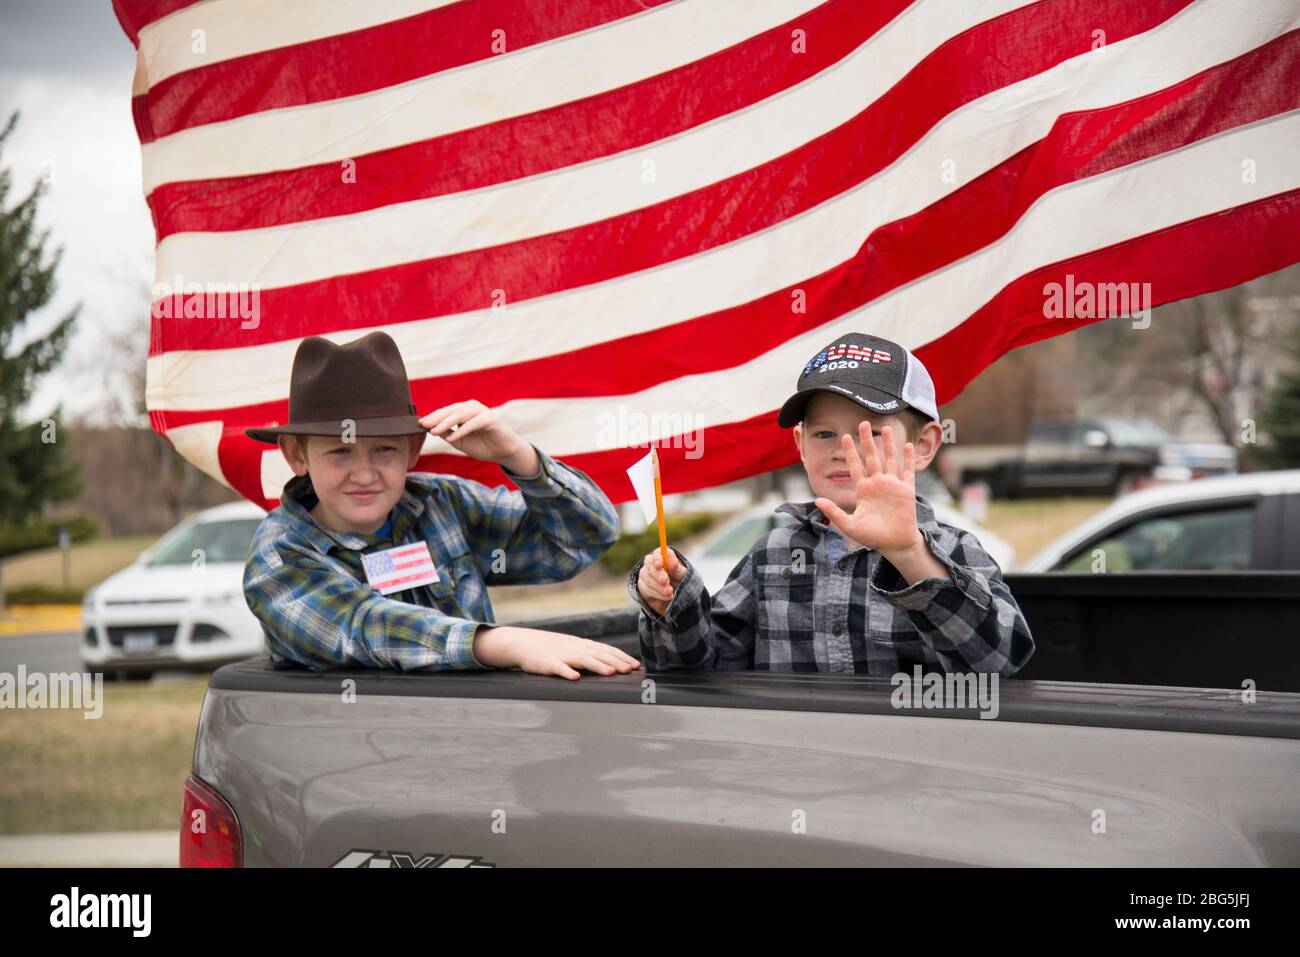 Helena, Montana - April 19, 2020: Boys riding in the back of a truck at a protest holding paper American flags and wearing a Trump 2020 hat. Children Stock Photo